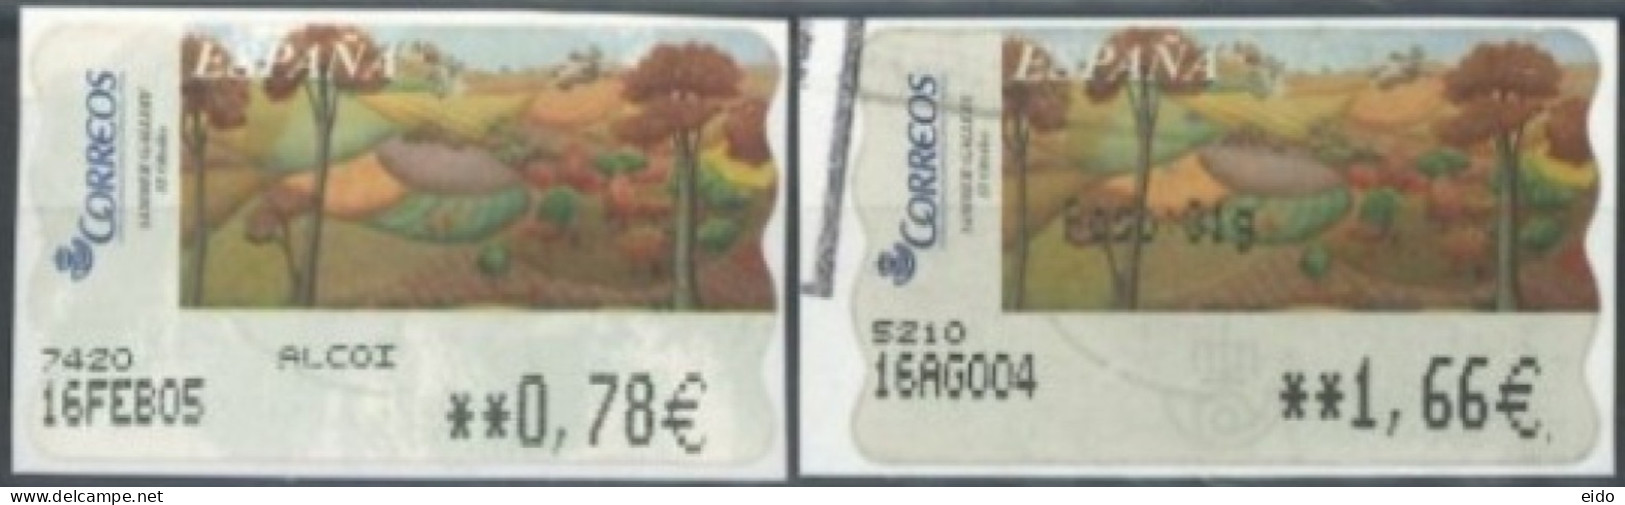 SPAIN - 2004/05 -  SAMER GALLERY, VERANO STAMPS LABELS SET OF 2 OF DIFFERENT VALUES, USED . - Used Stamps